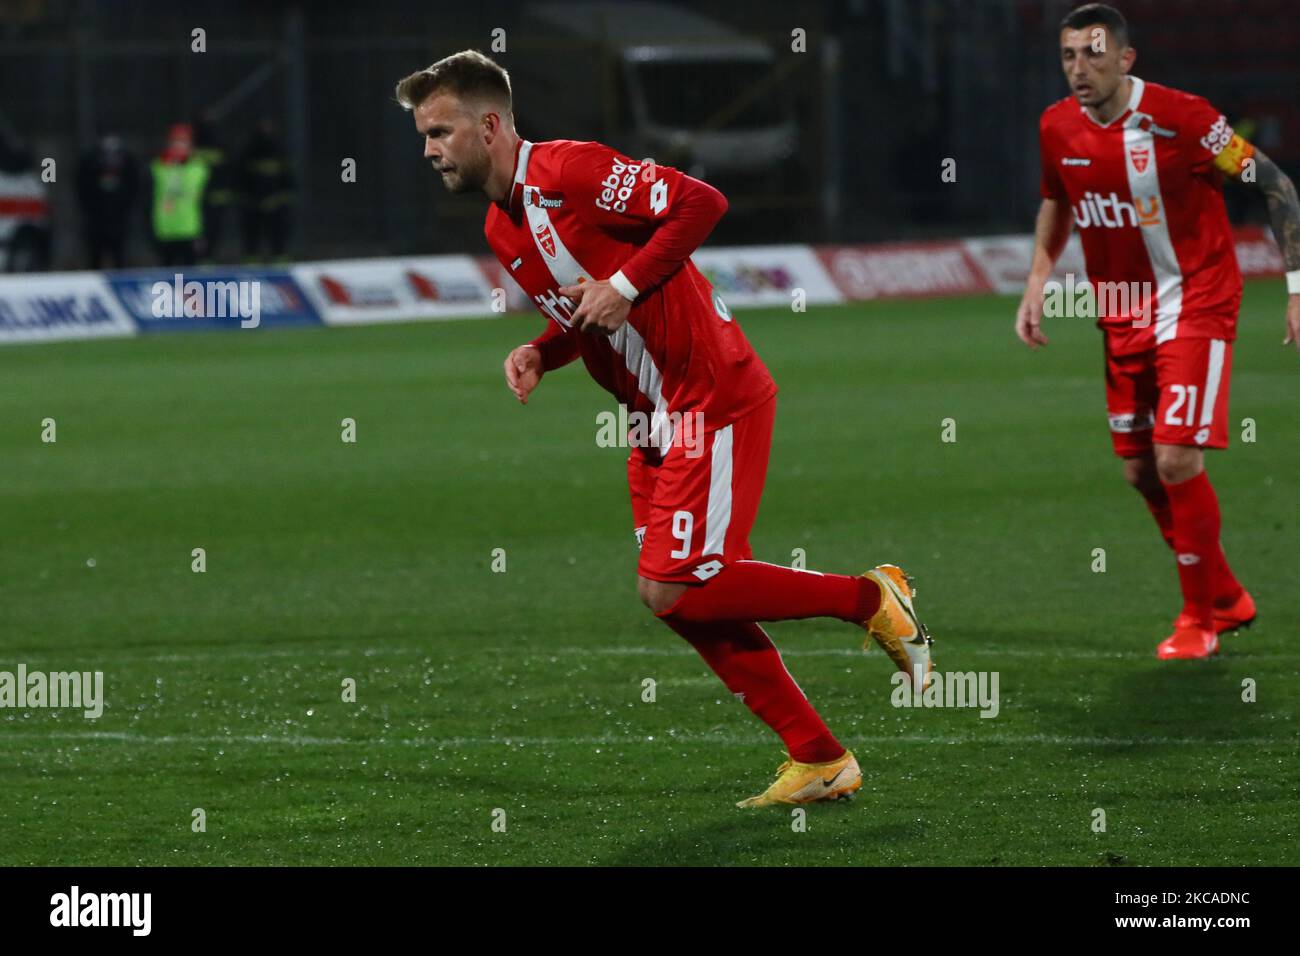 Christian Gytkjaer of AC Monza in action during the Serie B match between AC Monza and Pordenone Calcio at Stadio Brianteo on March 06, 2021 in Monza, Italy. (Photo by Mairo Cinquetti/NurPhoto) Stock Photo